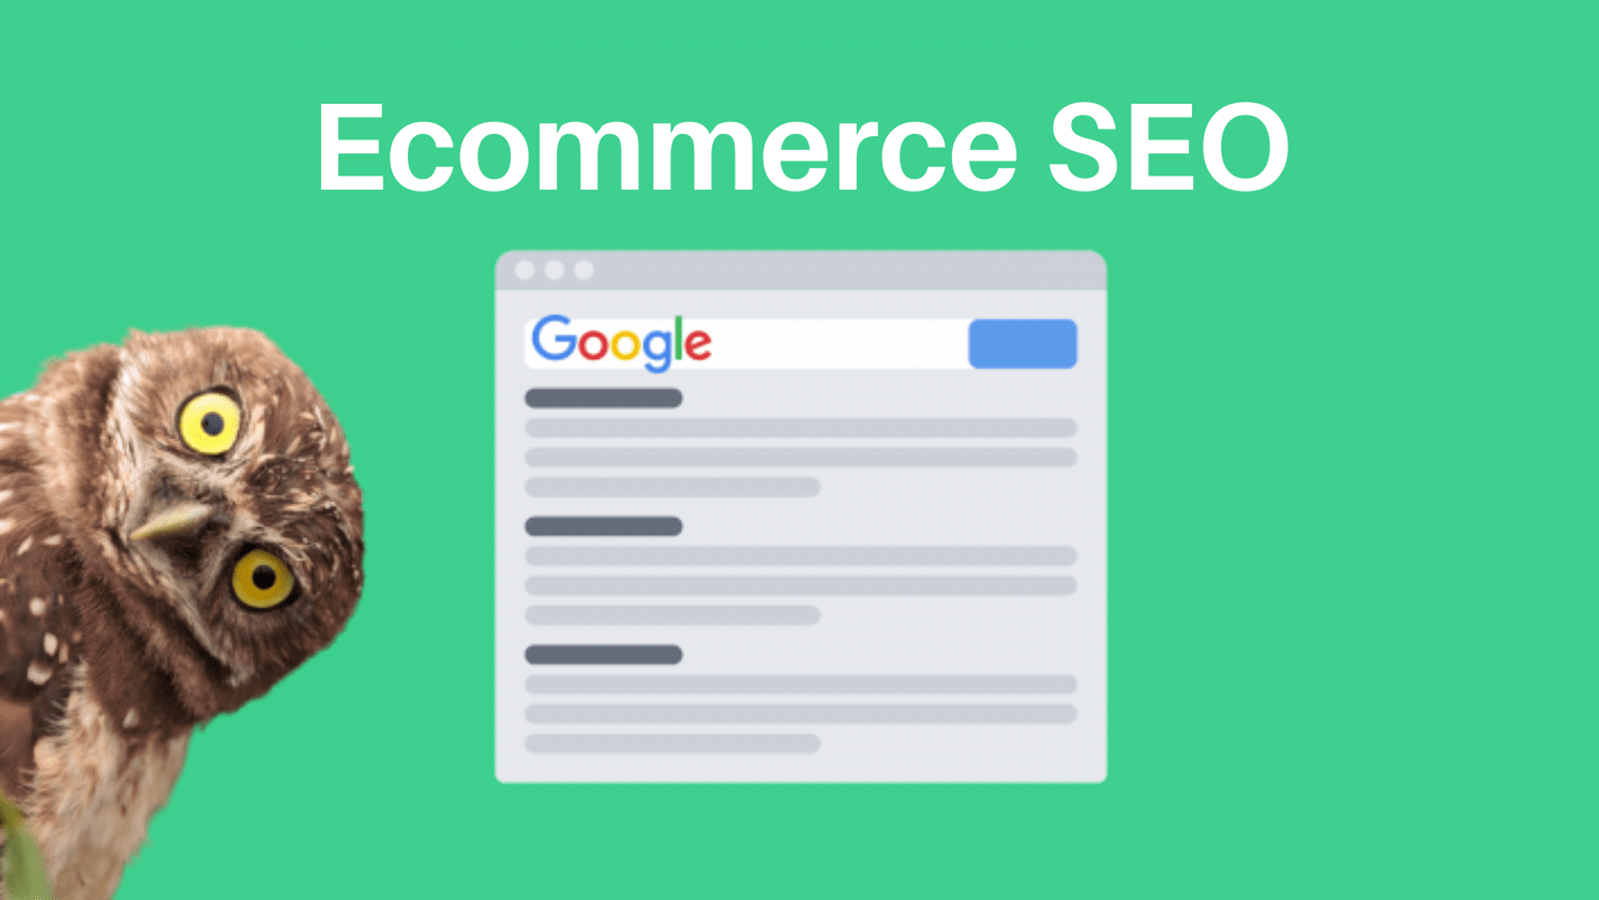 Simple SEO guide for new ecommerce websites